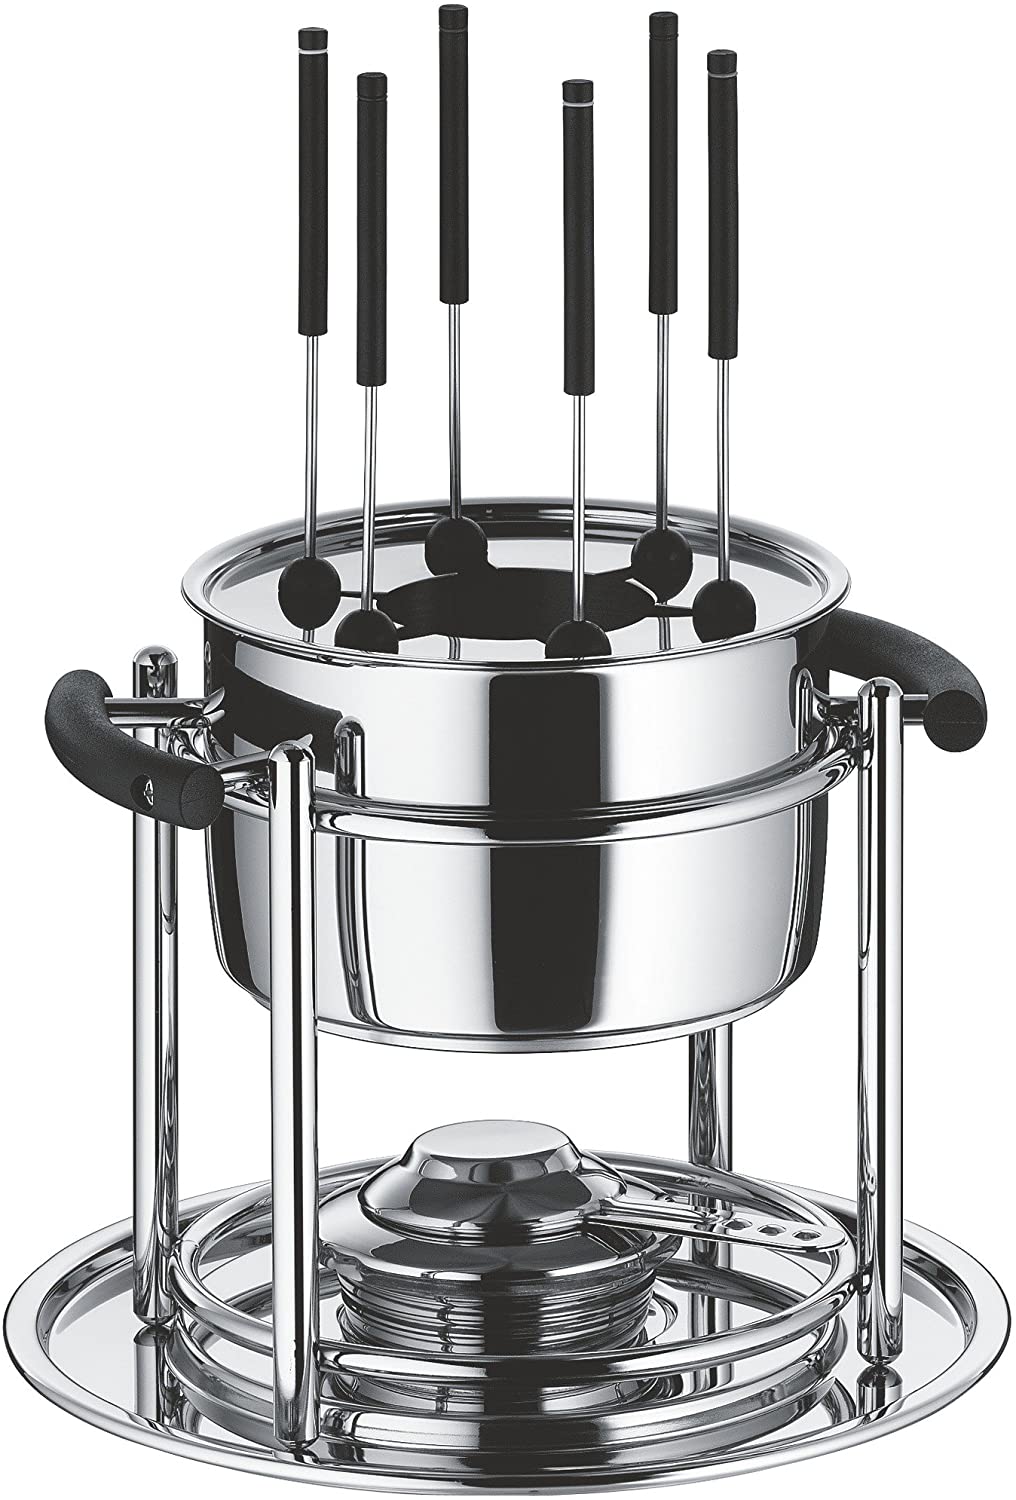 WMF Allegro Fondue Set 11 Pieces for 6 People with Burner and Forks, Cromargan Stainless Steel, Induction Fondue Pot, Dishwasher Safe